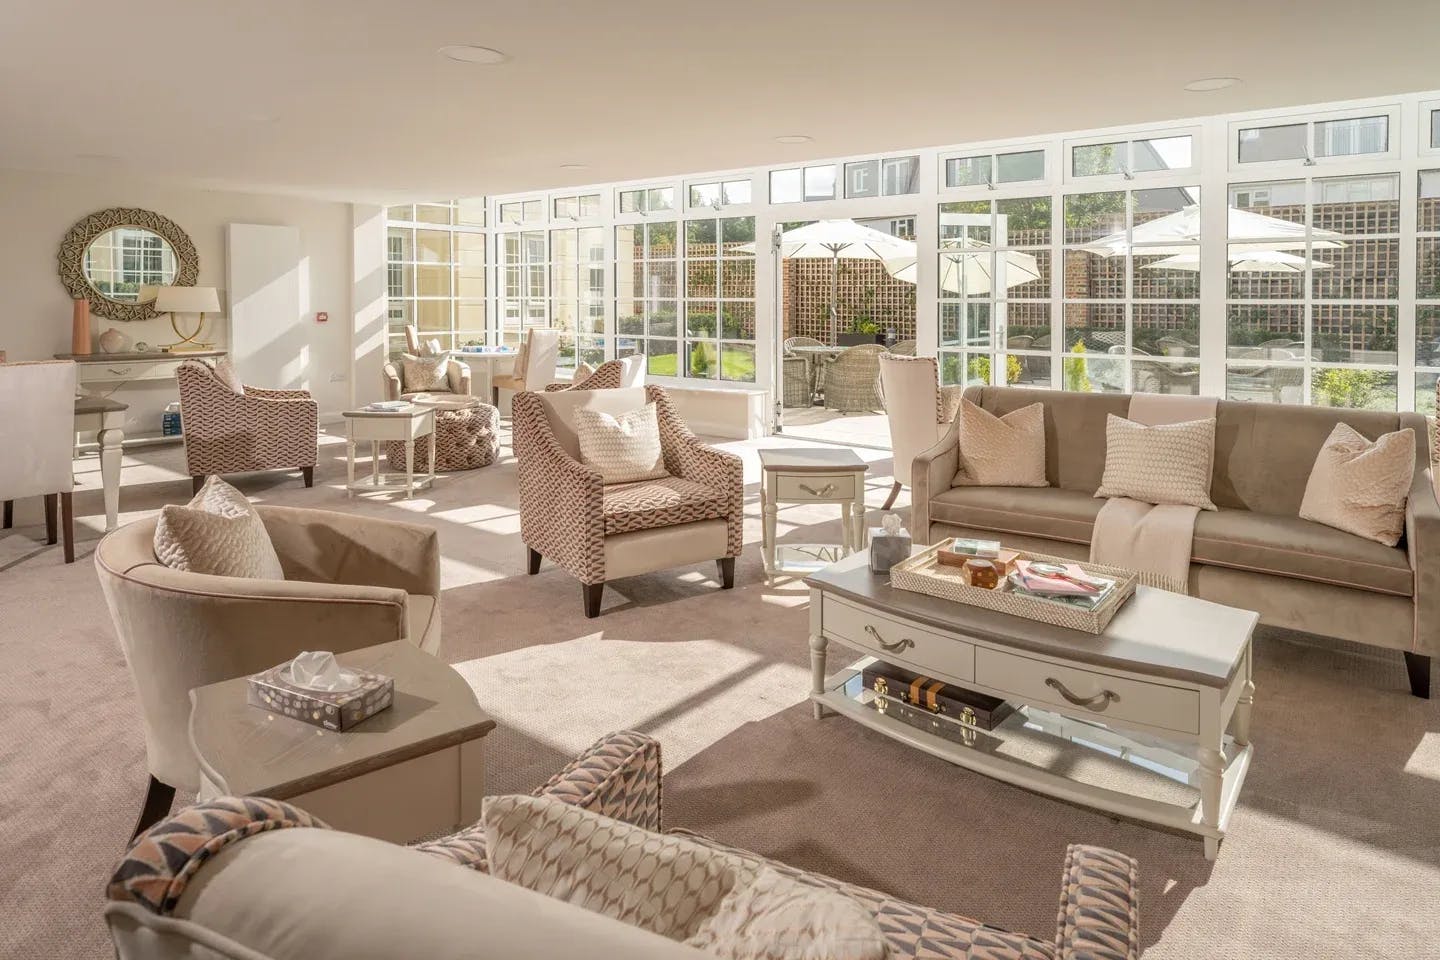 Communal Lounge at Beck House Retirement Development in Hounslow, Greater London